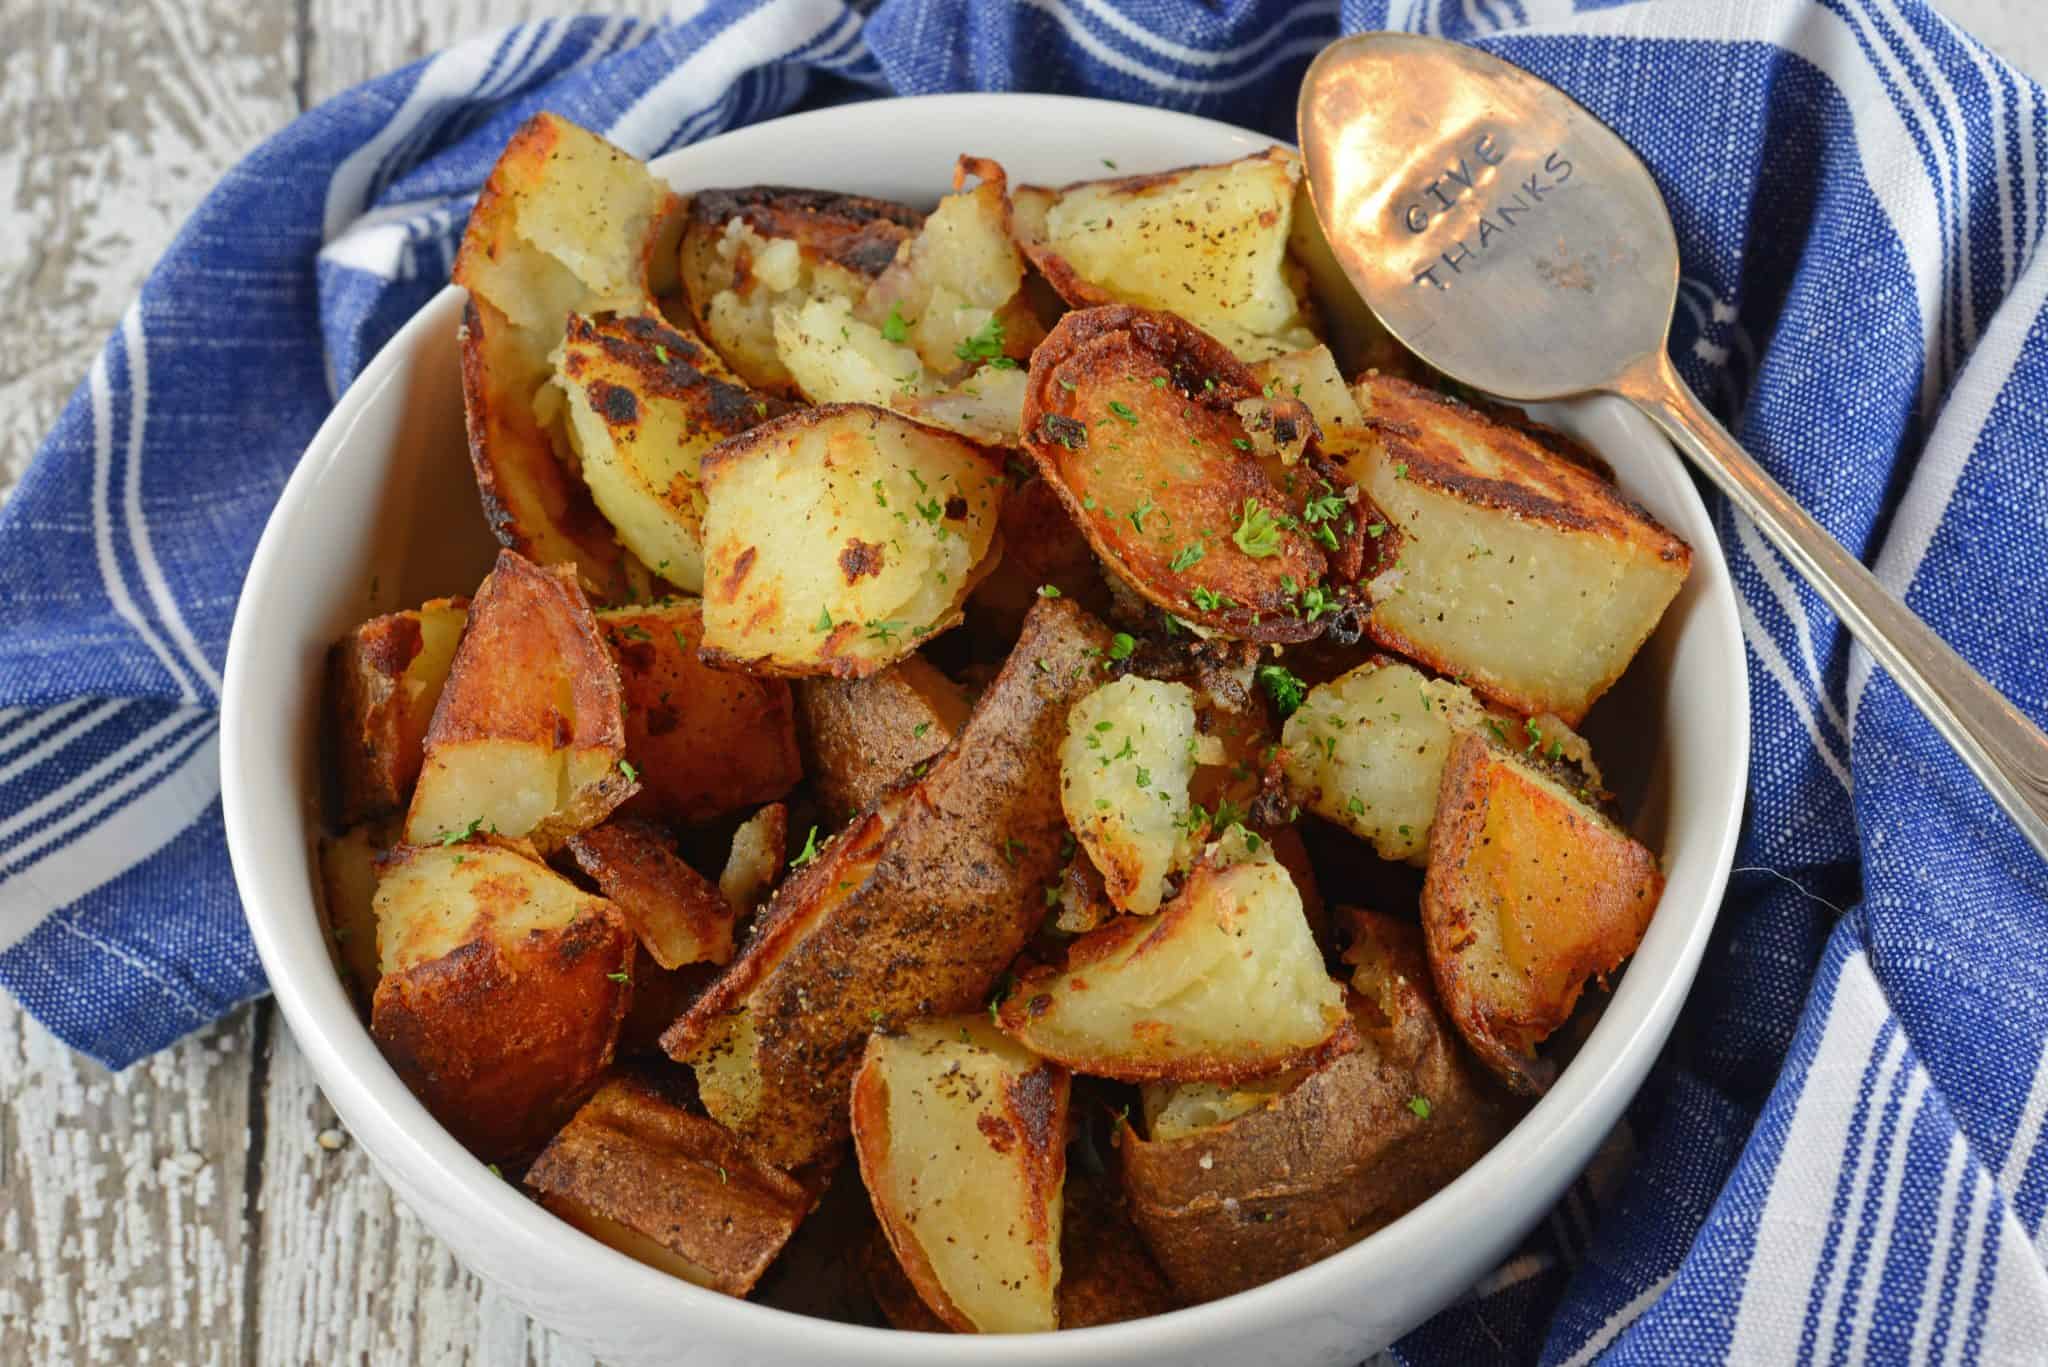 Make Crispy Home Fries just like at the restaurant at home. My recipe is super crispy, but also has a secret ingredient guaranteed to make these the best breakfast potatoes ever!